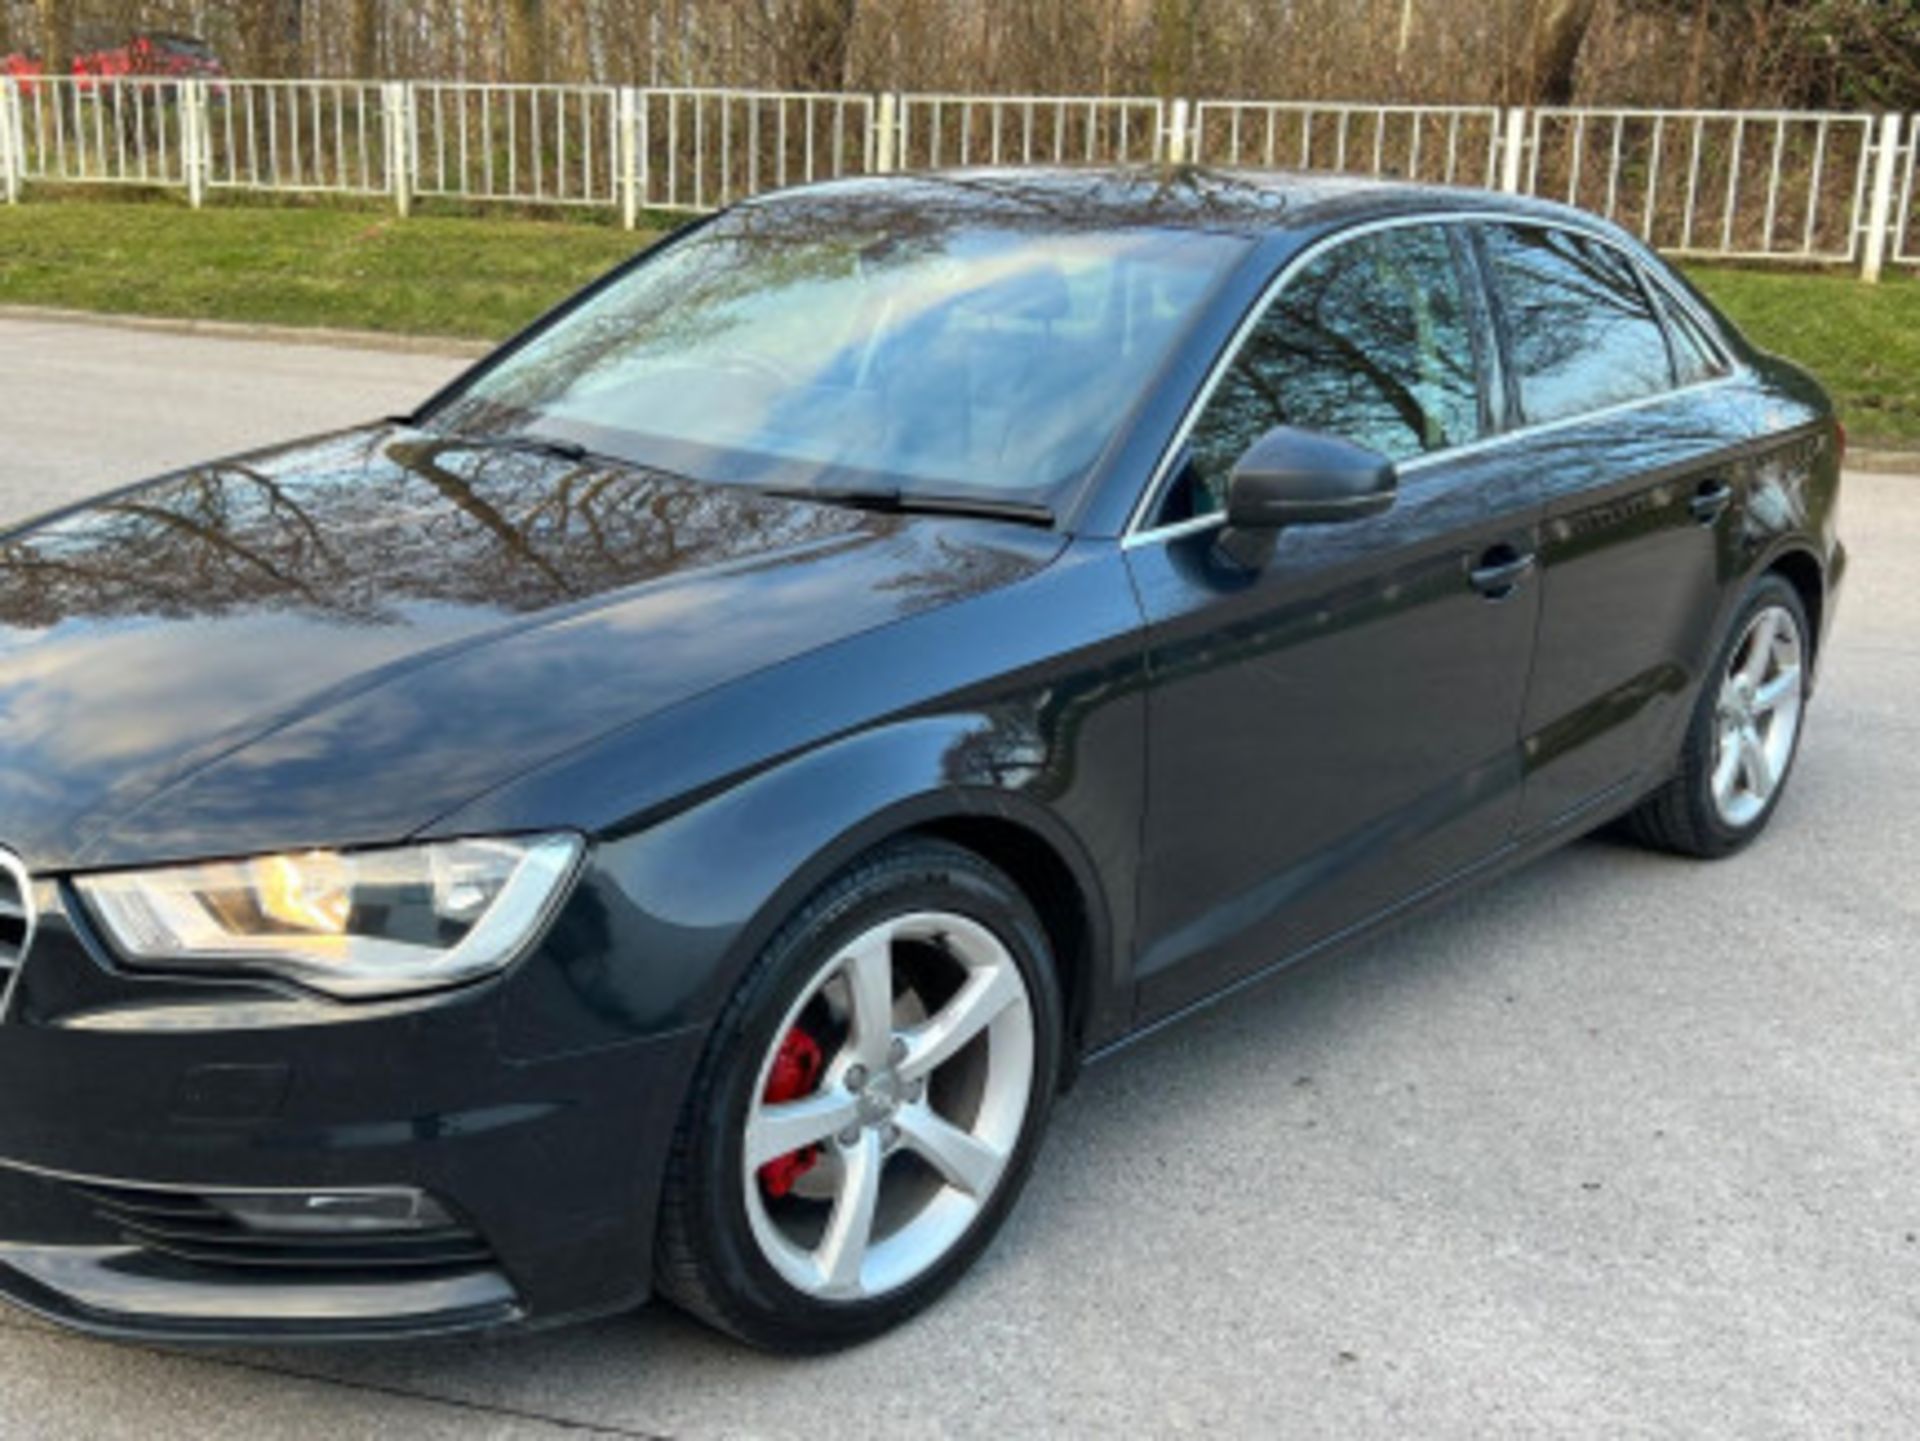 AUDI A3 2.0TDI SPORTBACK - STYLE, PERFORMANCE, AND COMFORT COMBINED >>--NO VAT ON HAMMER--<< - Image 86 of 216